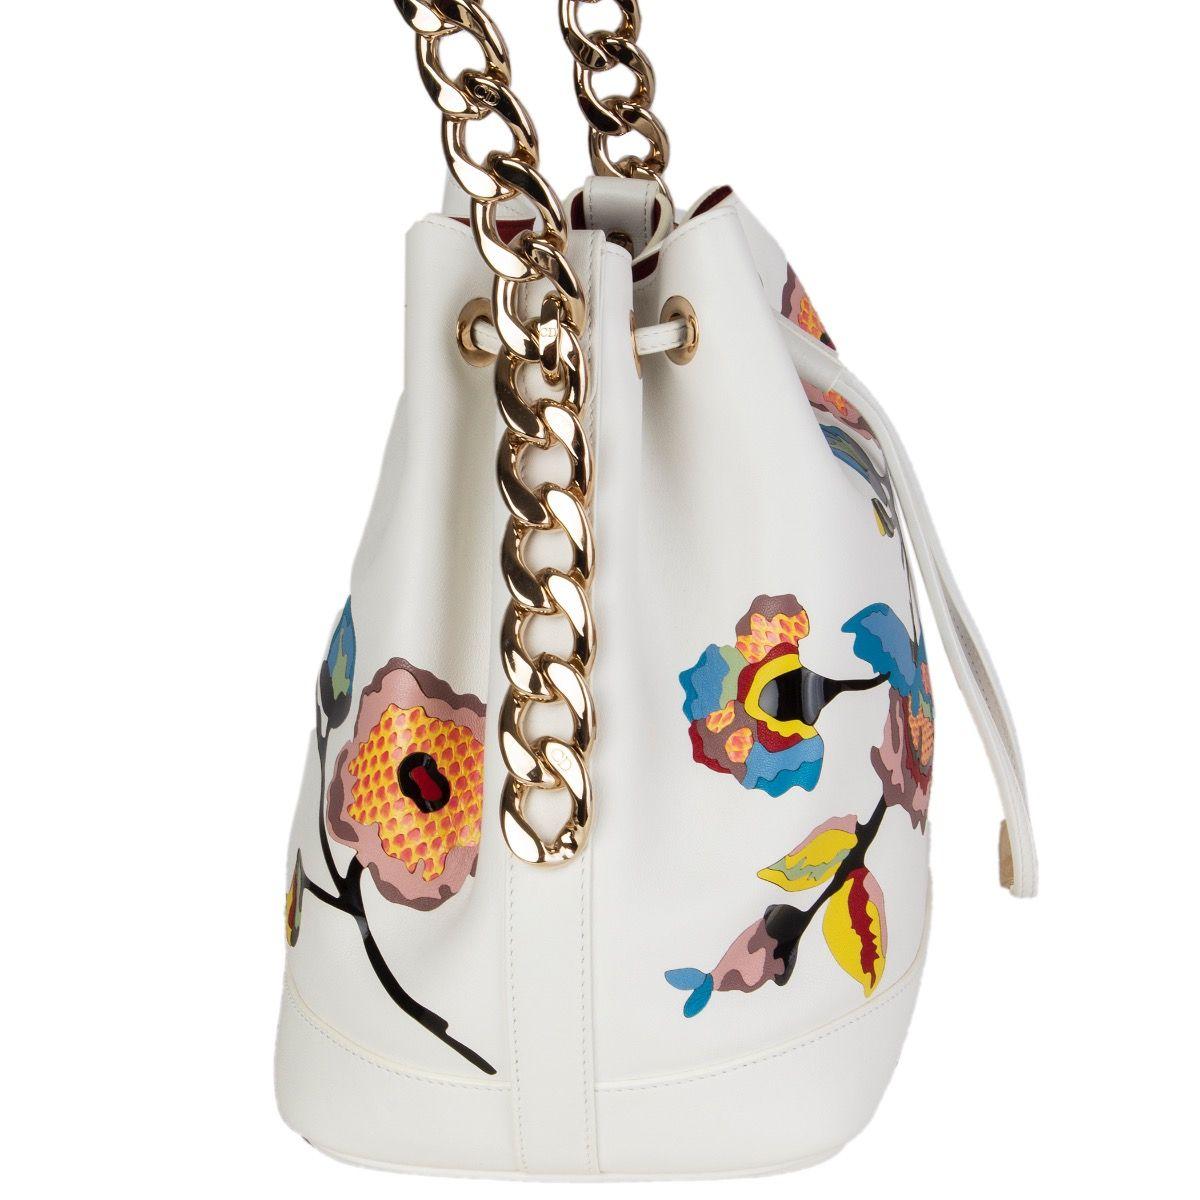 Christion Dior bucket form the Cruise 16 collection in off-white calfskin with embossed multicolor flower featuring pink and yellow snakeskin details. Open with a drawstring on top and is lined deep red calfskin with one zip pocket against the back